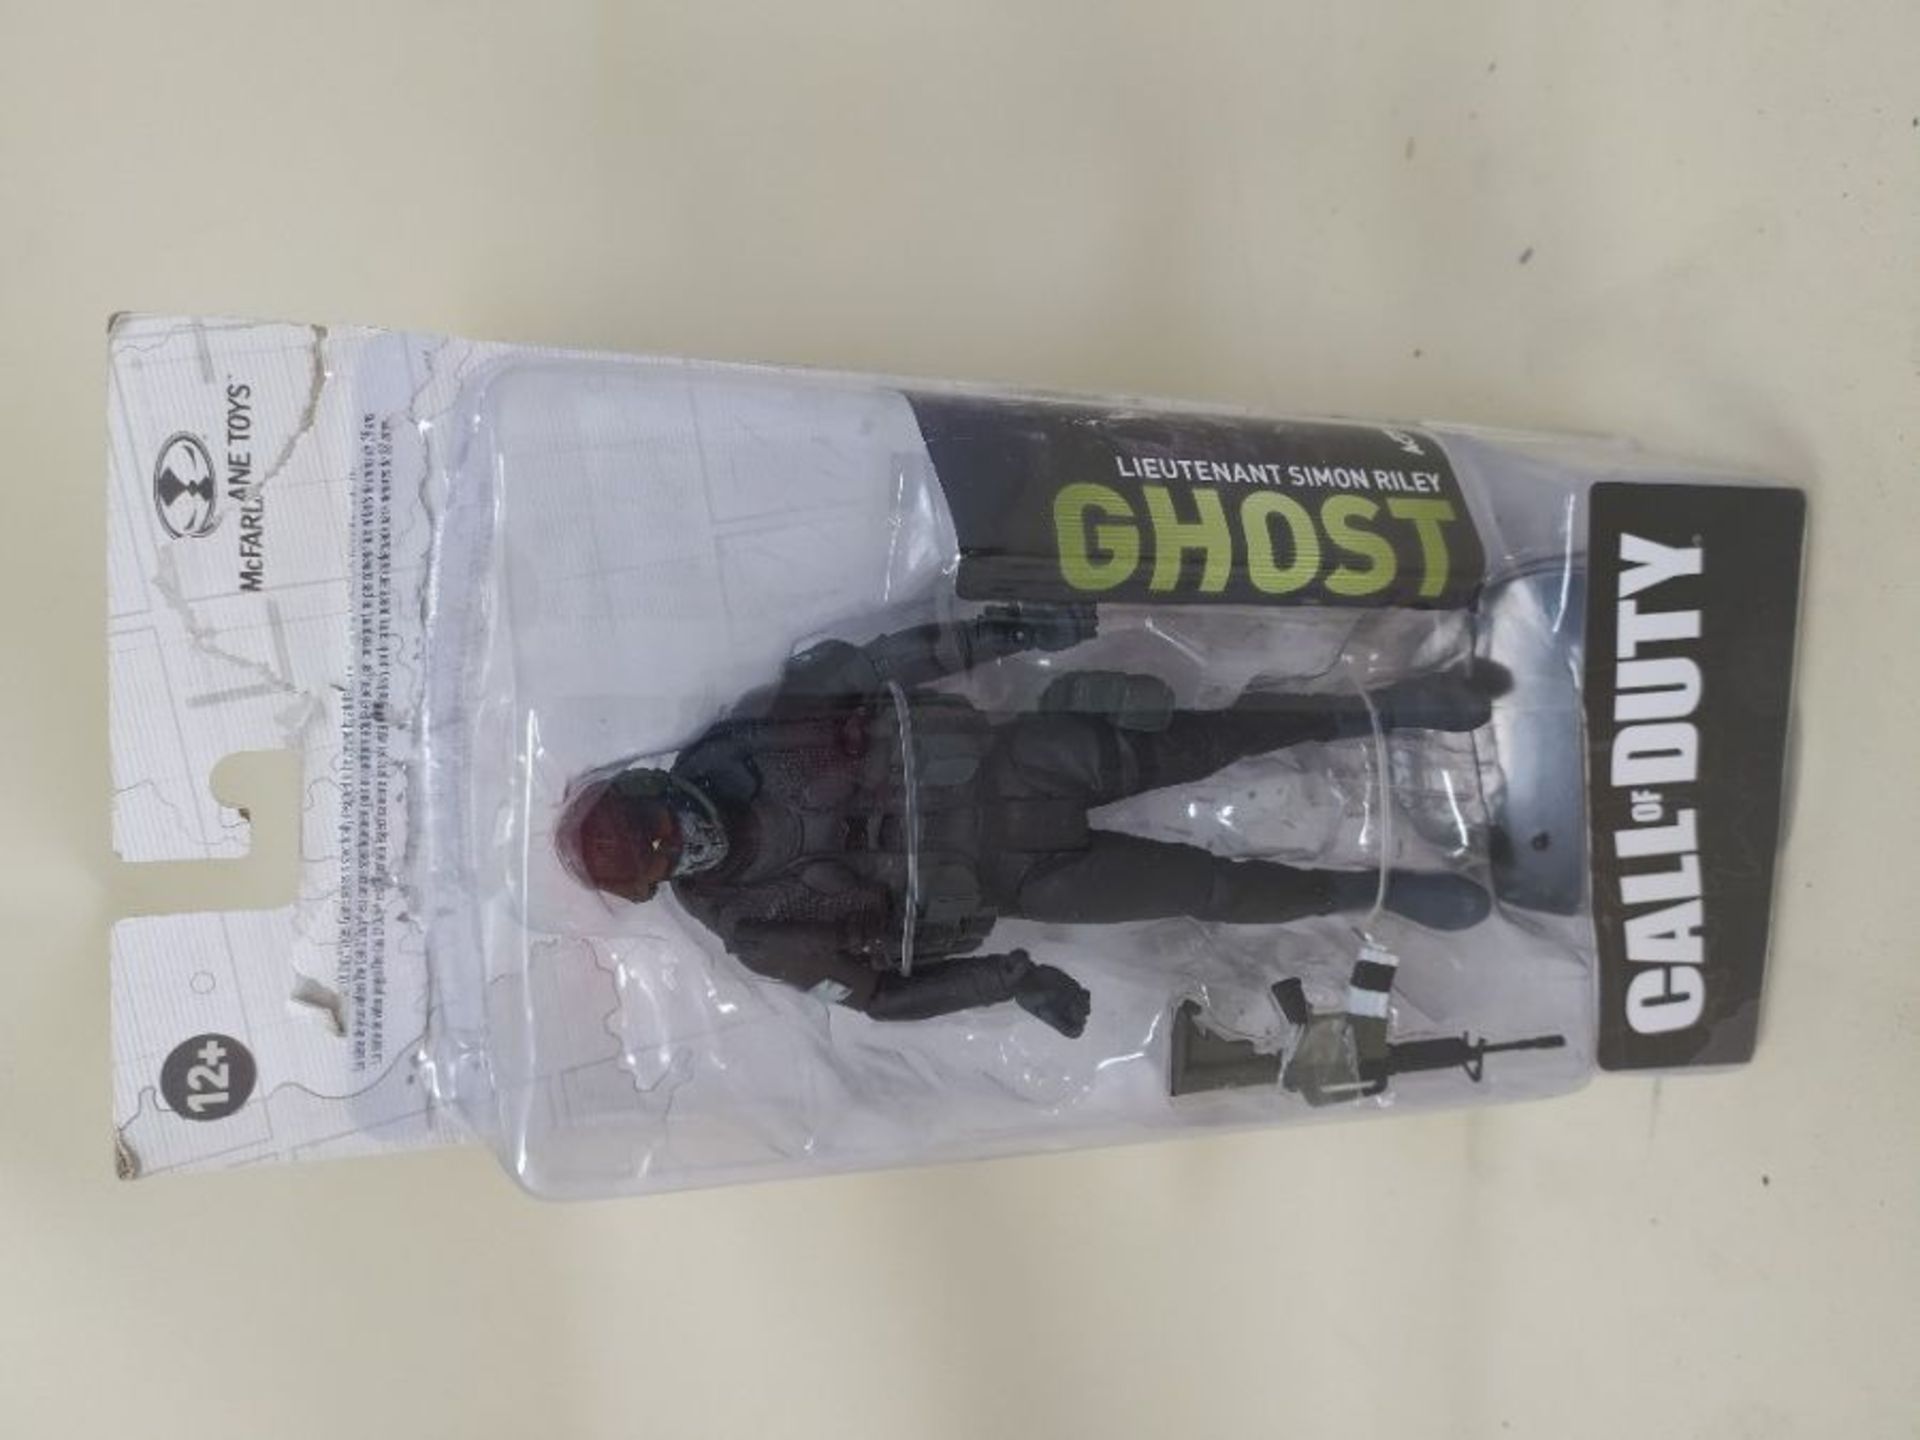 Call of Duty 10401 Ghost Action Figure, Black, Grey - Image 2 of 3